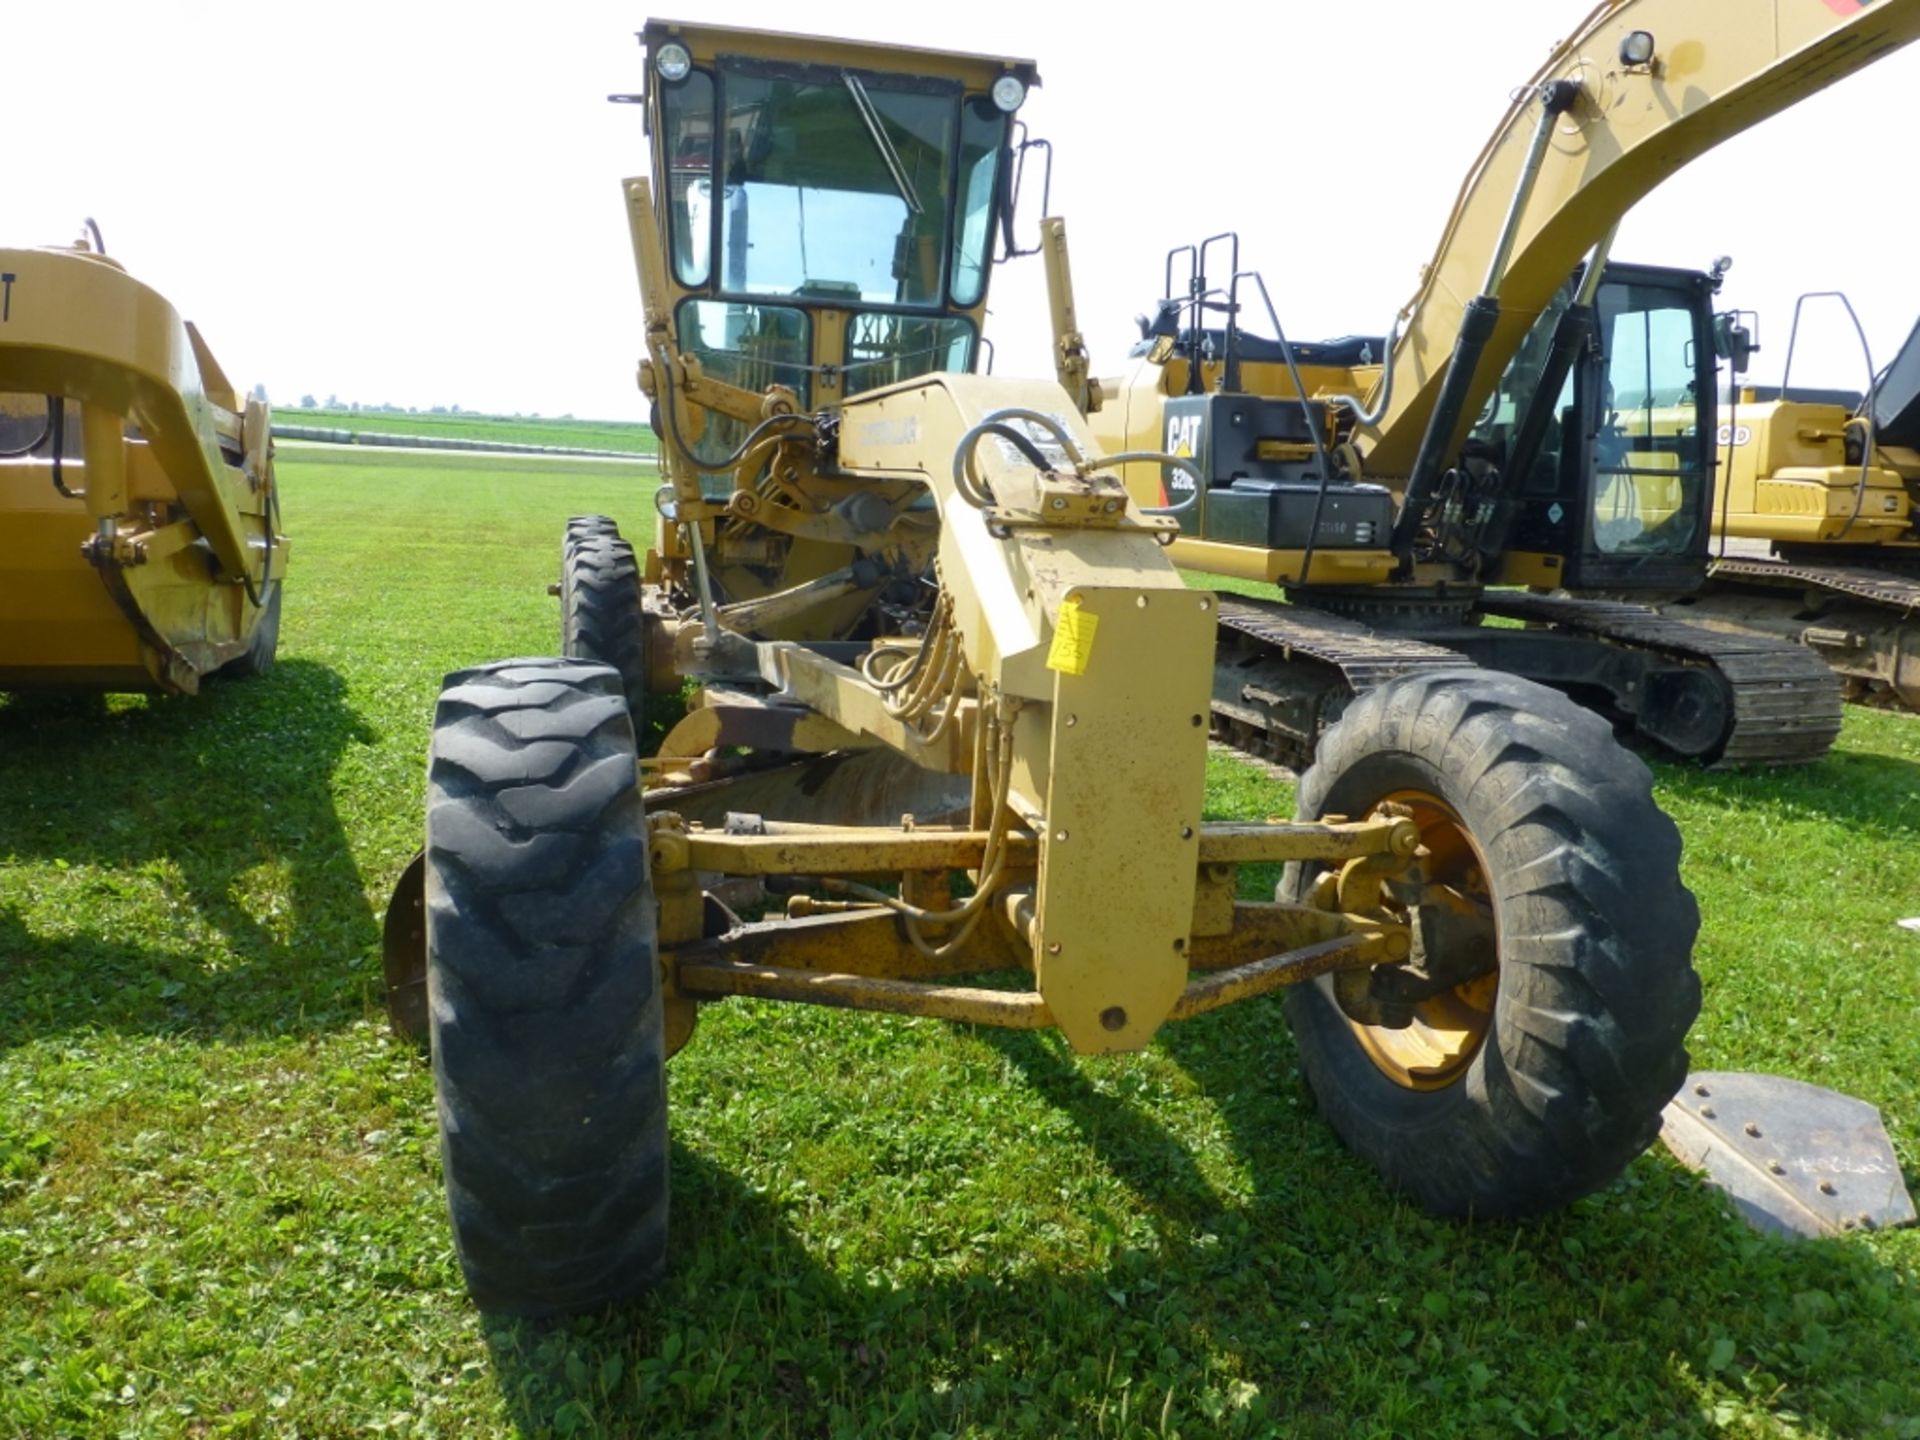 Caterpillar 120G motor grader with 13'10" moldboard se:87v871. Power shift. 7720 unverified hrs. - Image 13 of 27